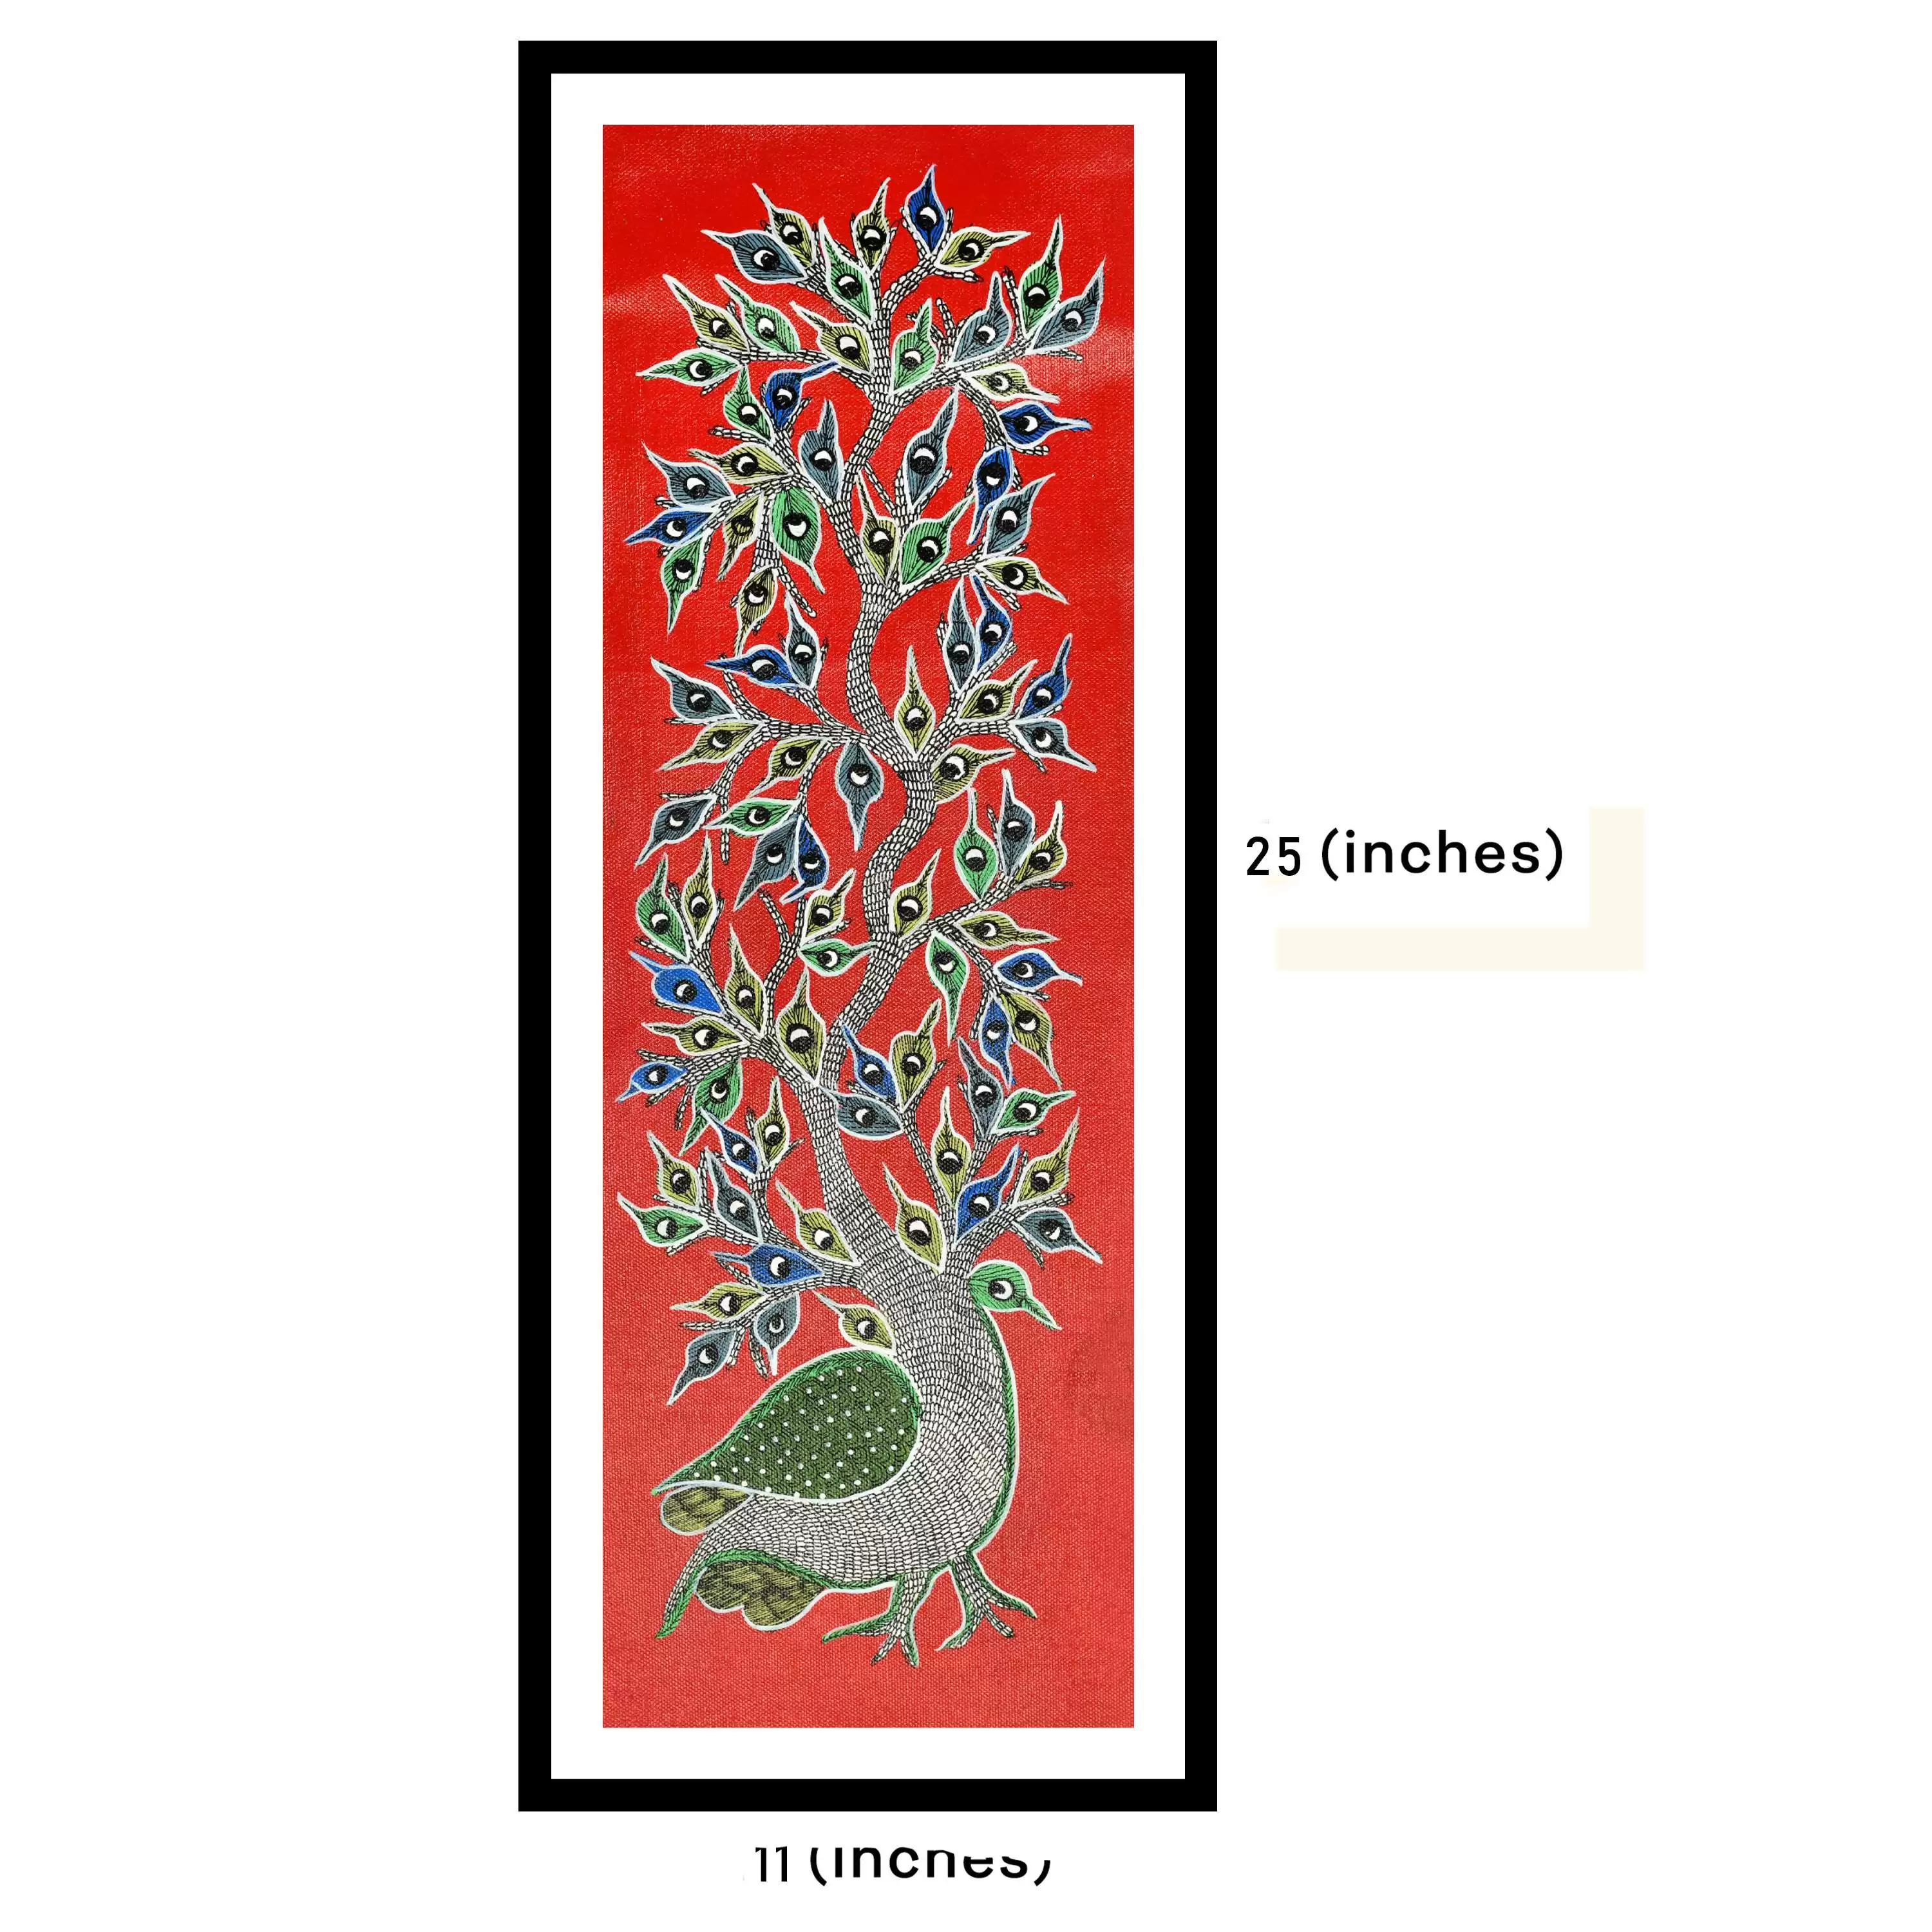 Framed Gond Art Painting of Peacock & Tree | Traditional Gond Painting for Home & Office Wall Art Decor